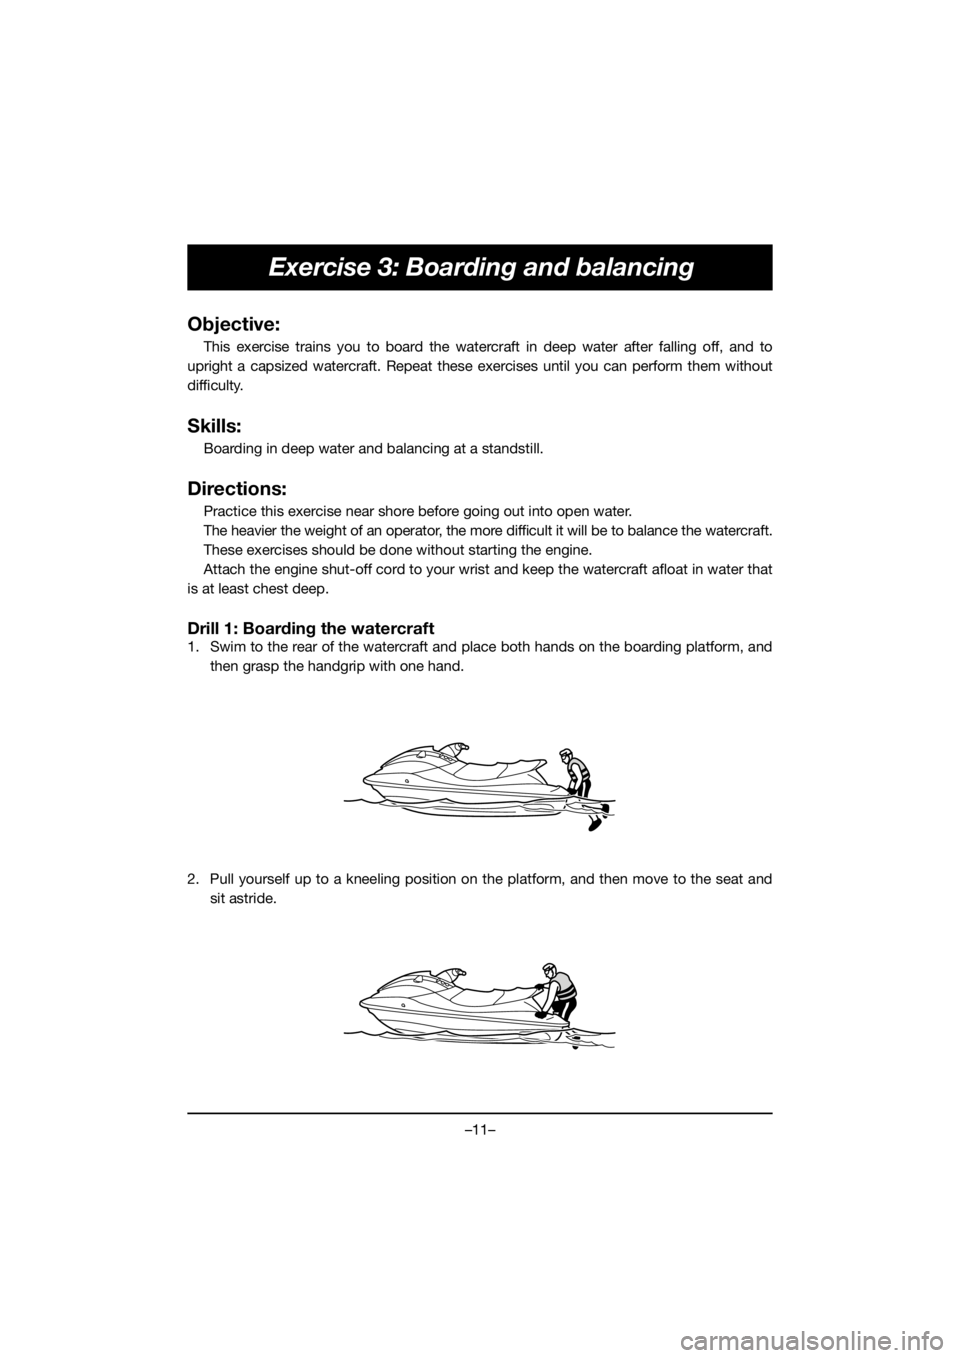 YAMAHA VX DELUXE 2019  Manual de utilização (in Portuguese) –11–
Exercise 3: Boarding and balancing
Objective:
This exercise trains you to board the watercraft in deep water after falling off, and to
upright a capsized watercraft. Repeat these exercises un